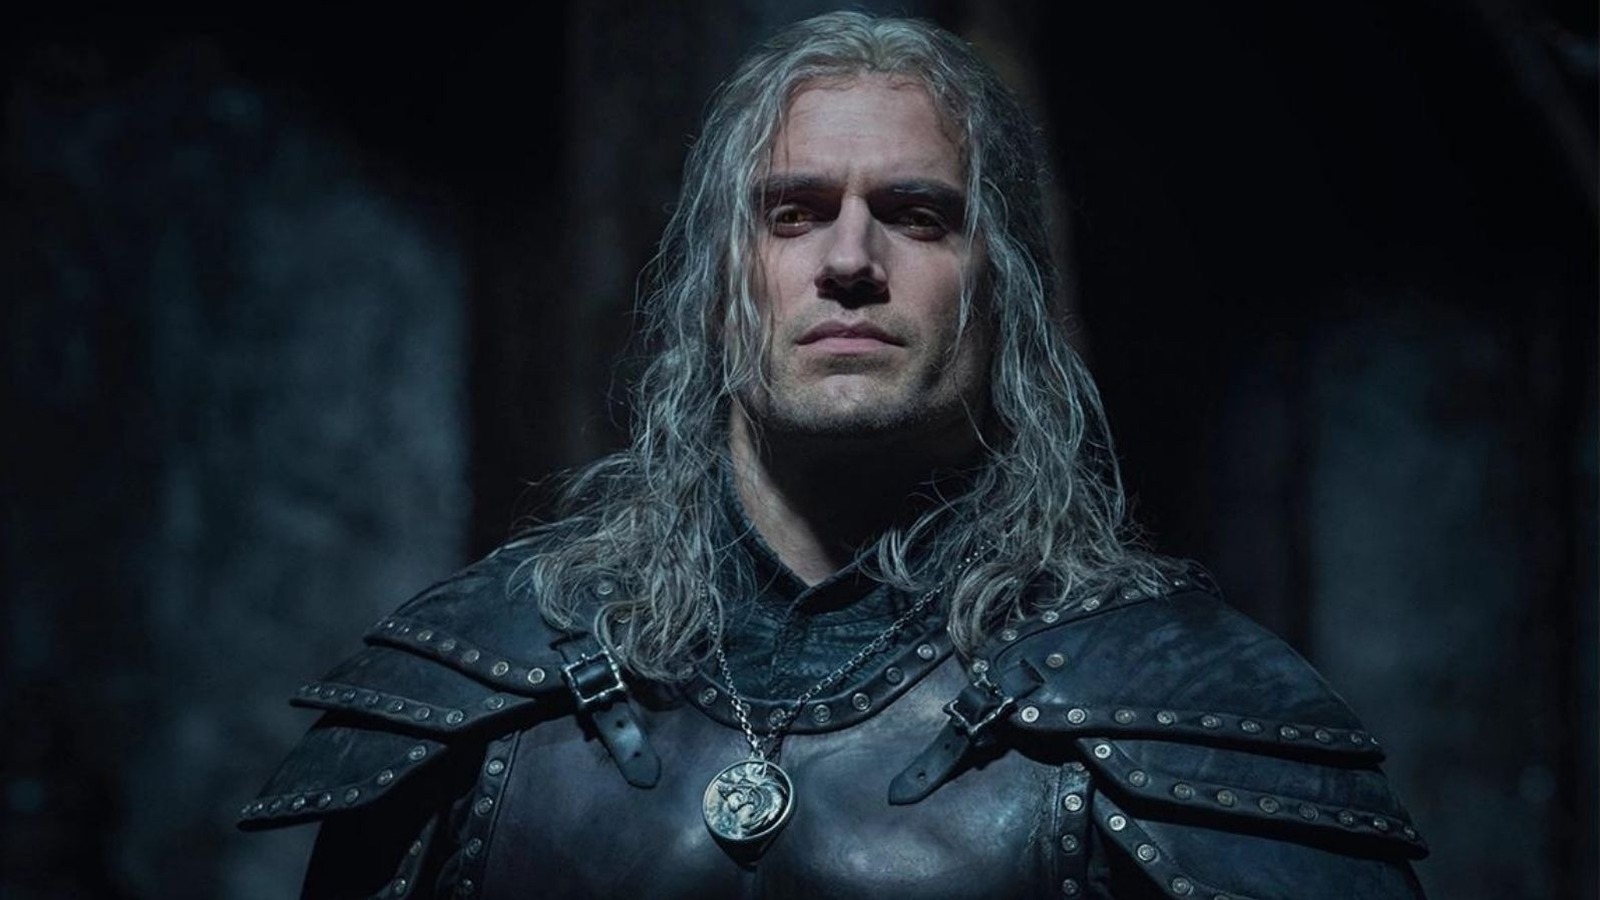 The Witcher' Season 2 Finale Reveal, Explained